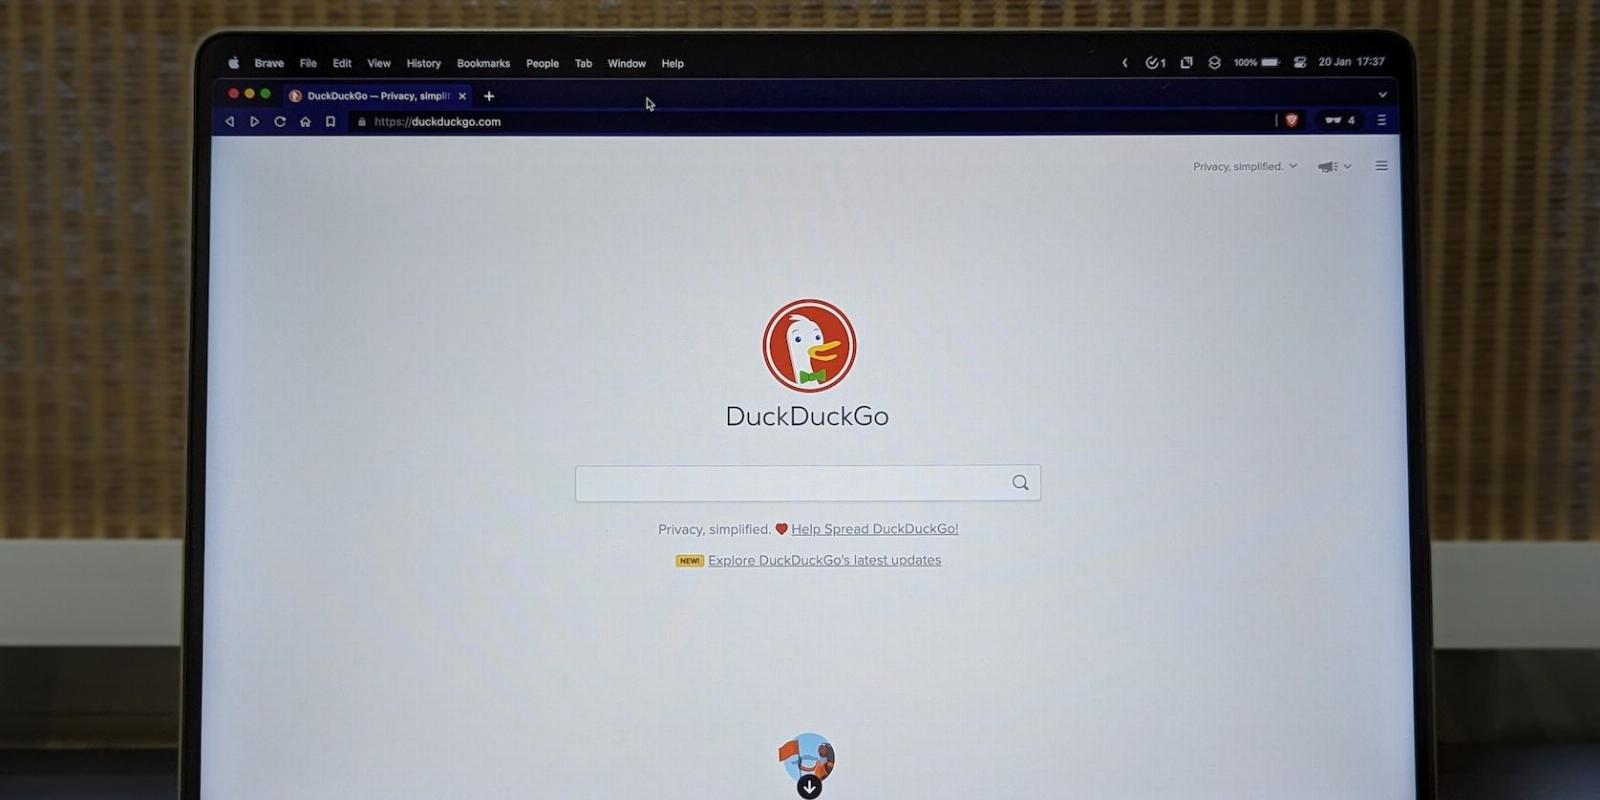 10 DuckDuckGo Features That’ll Simplify Your Daily Tasks